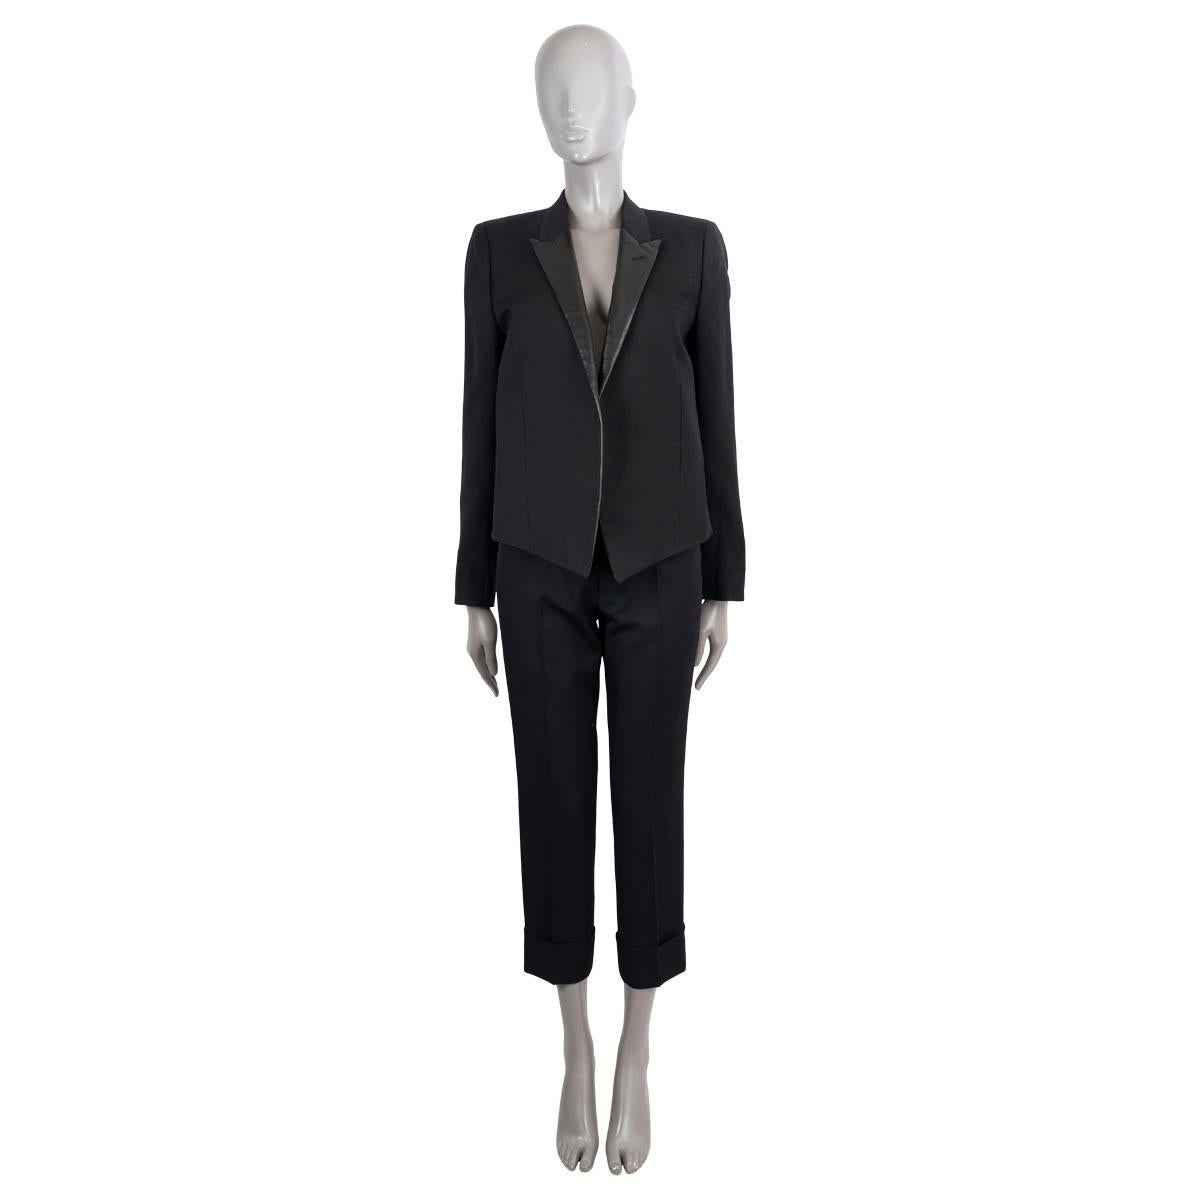 100% authentic Saint Laurent iconic open blazer in black wool (100%) with peak lapels in leather. Lined in silk (100%). Has been worn and is in excellent condition. 

2014 Spring/Summer

Measurements
Model	340074
Tag Size	42
Size	L
Shoulder